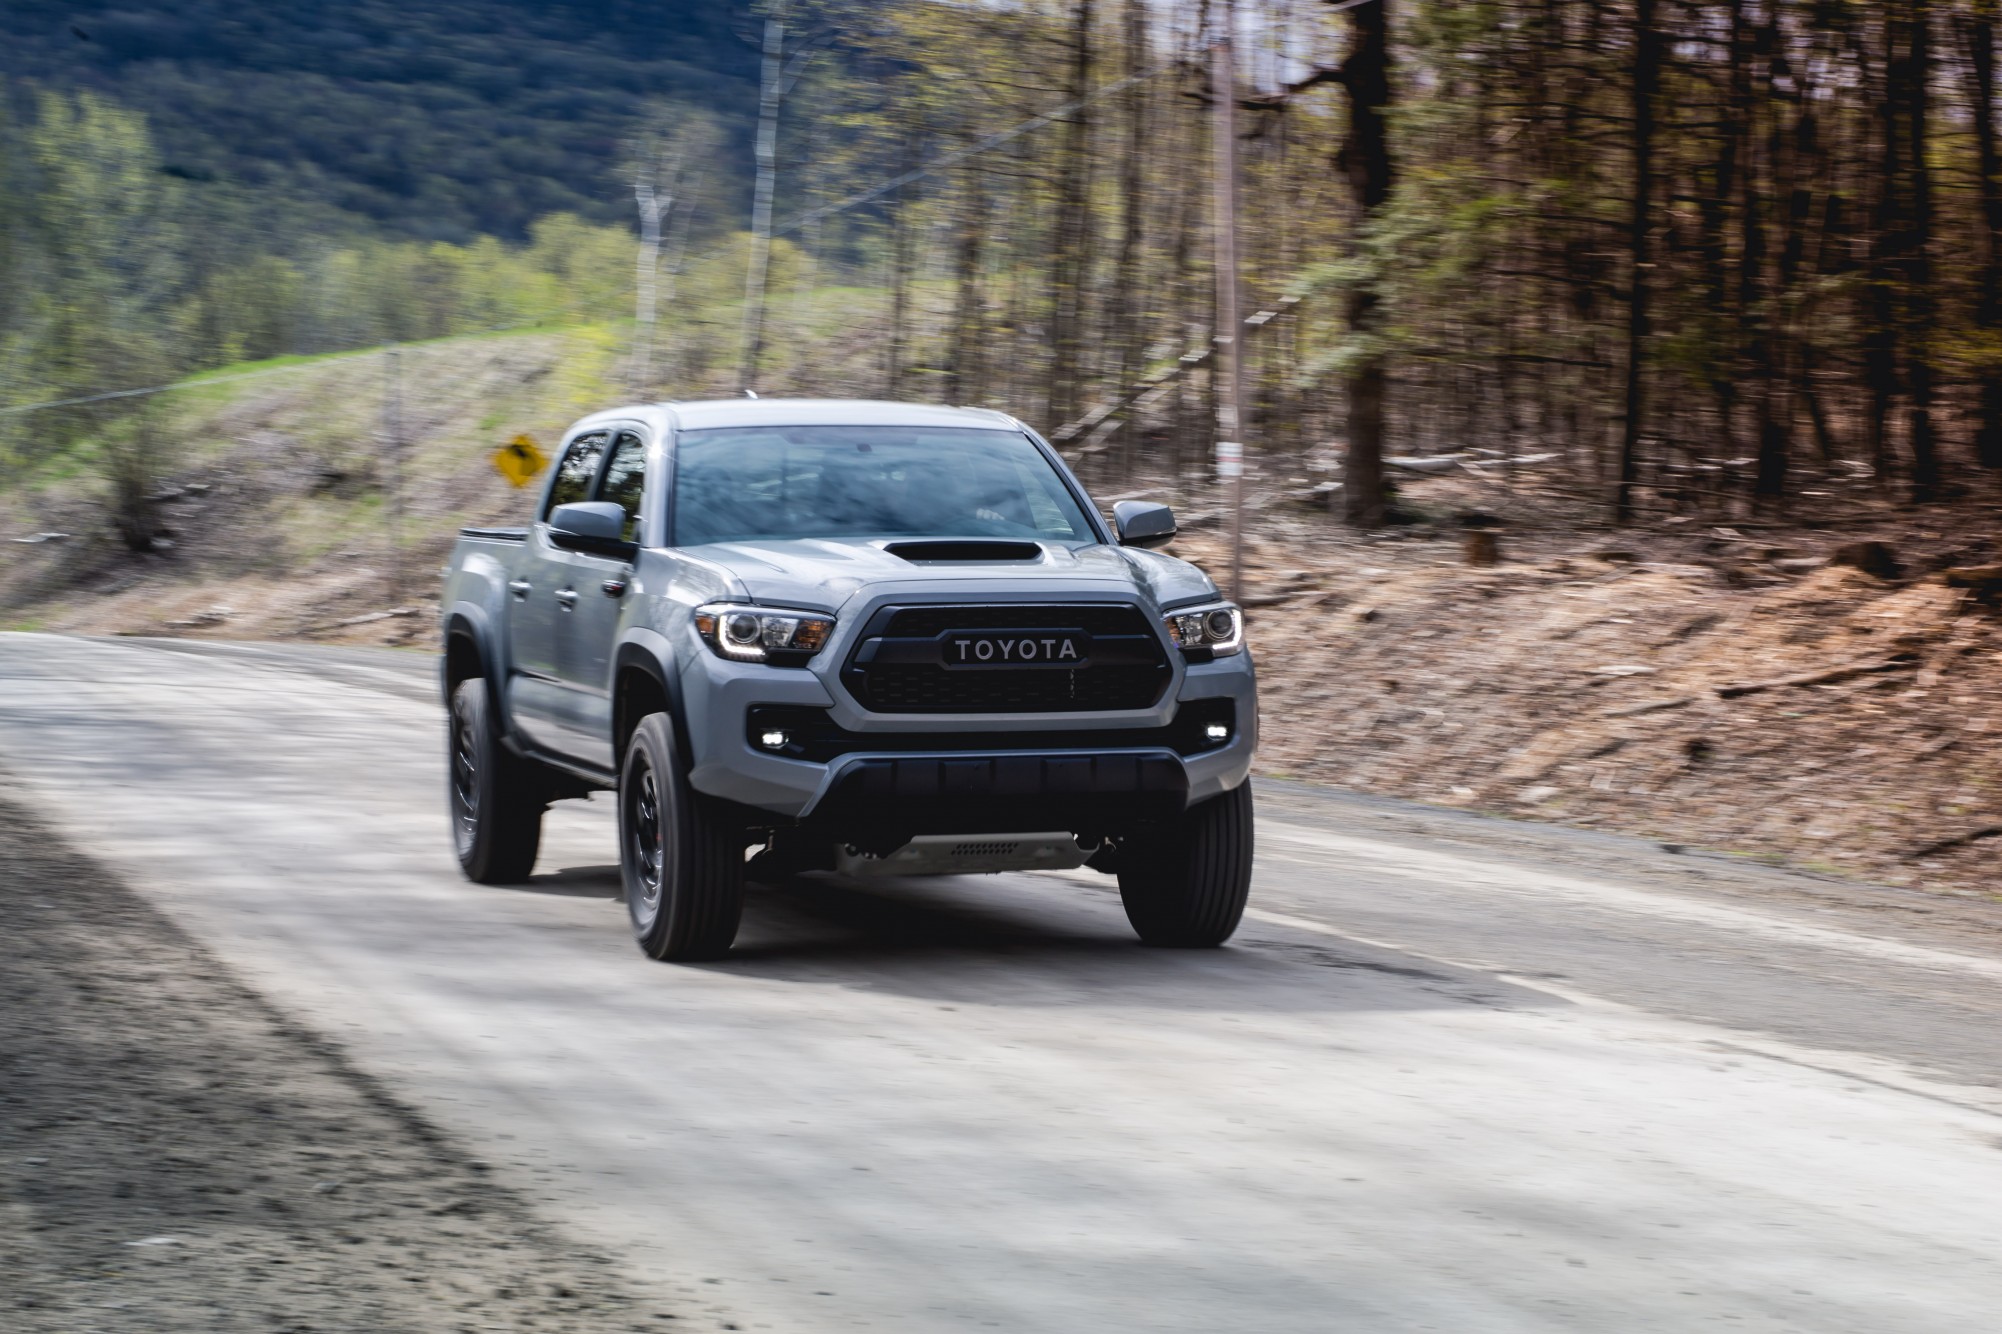 The 2017 Toyota Tacoma Trd Pro Is The Bro Truck We All Need